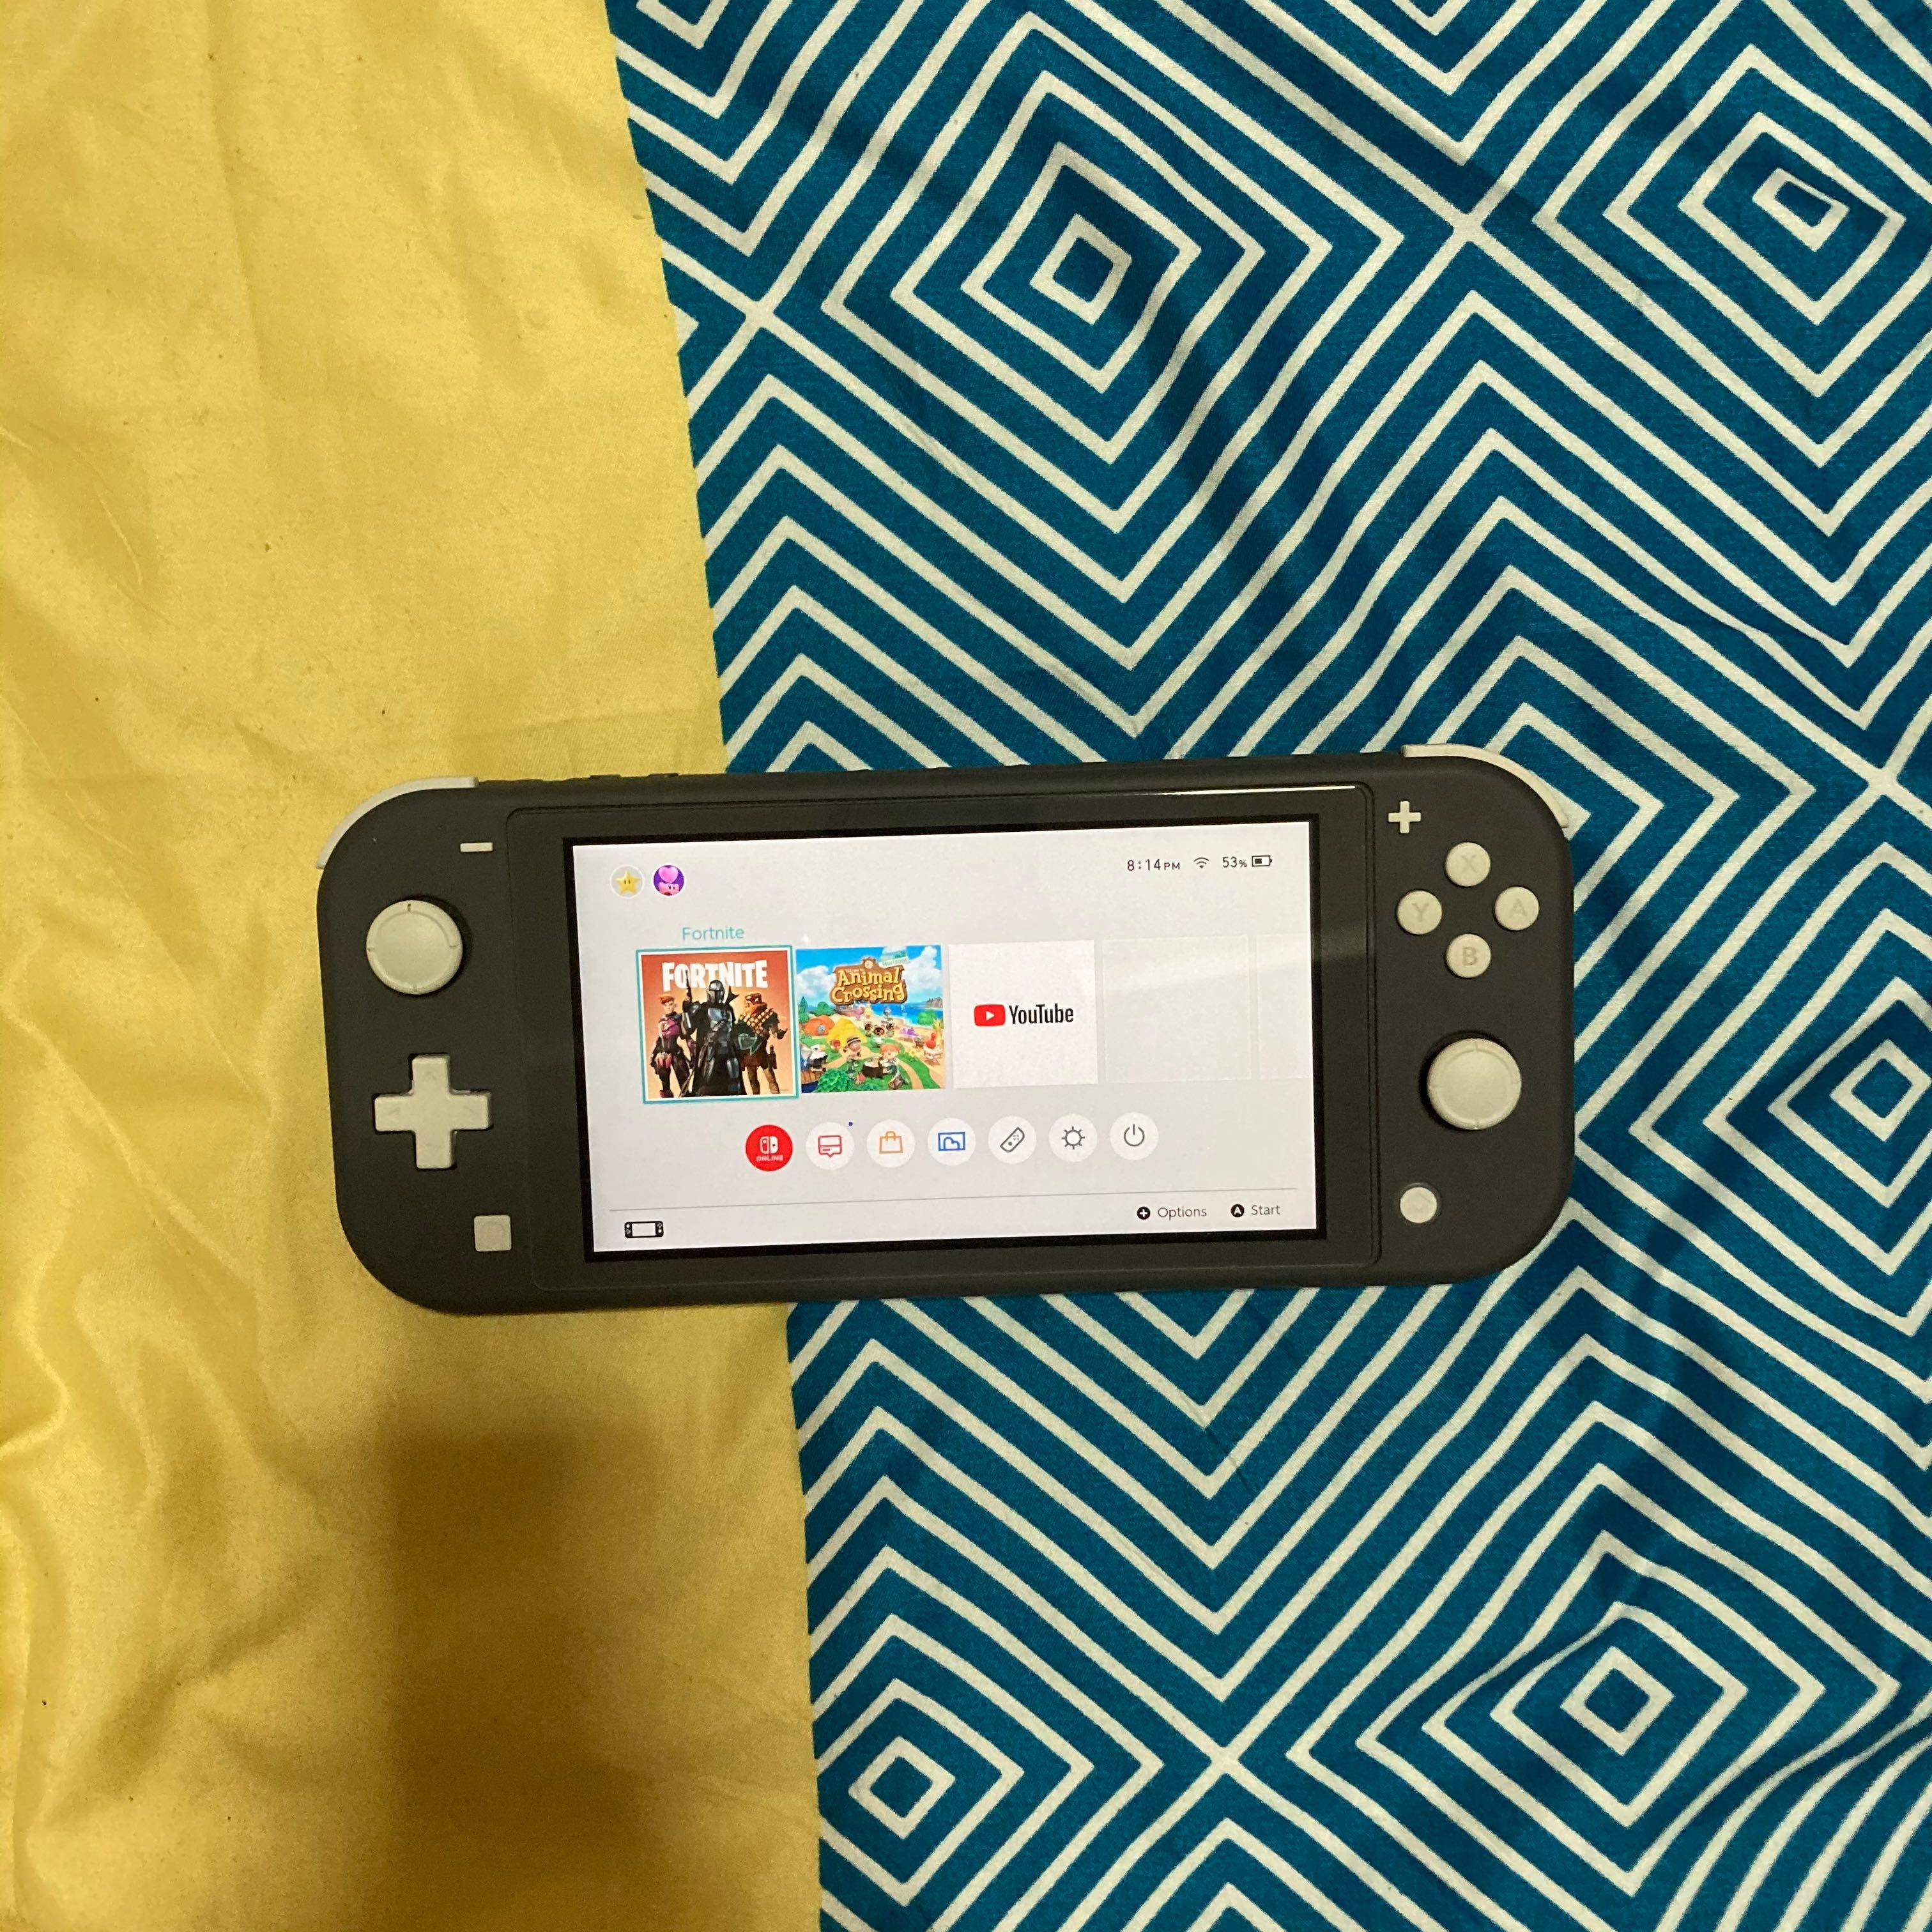 switch lite sell